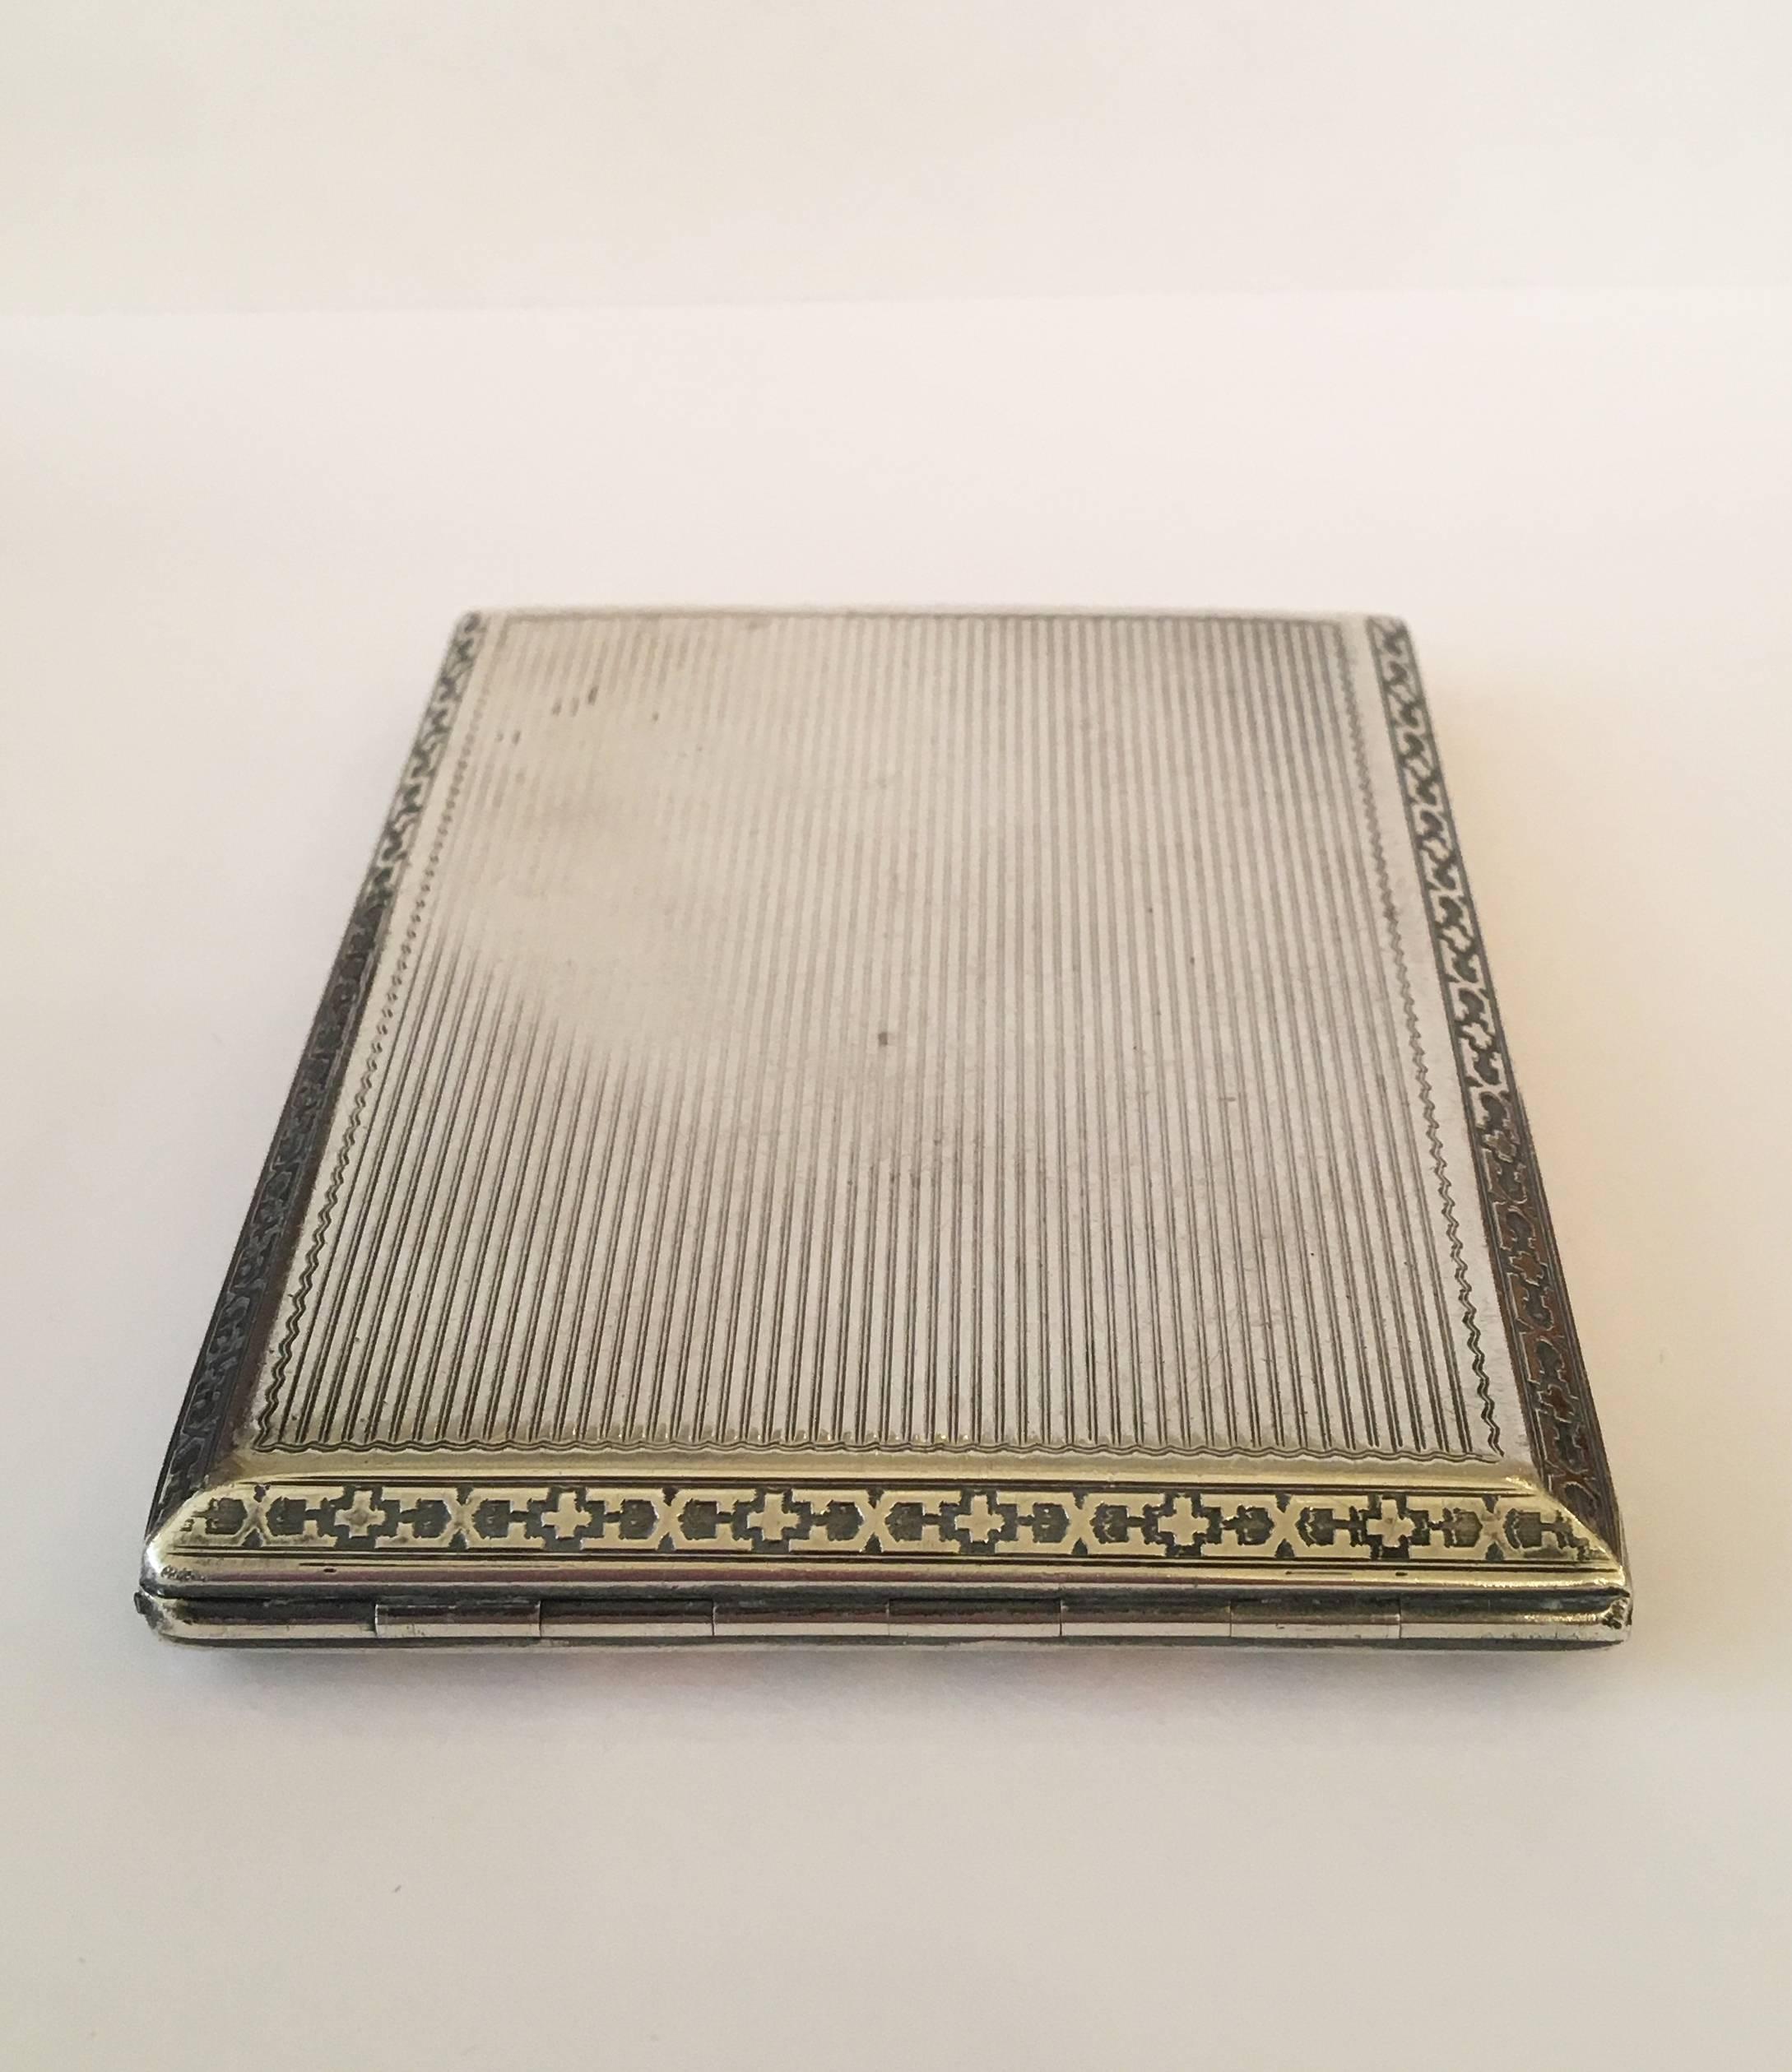 Inlay Early 20th Century Sterling Silver Hermès Cigarette Box or Business Card Holder